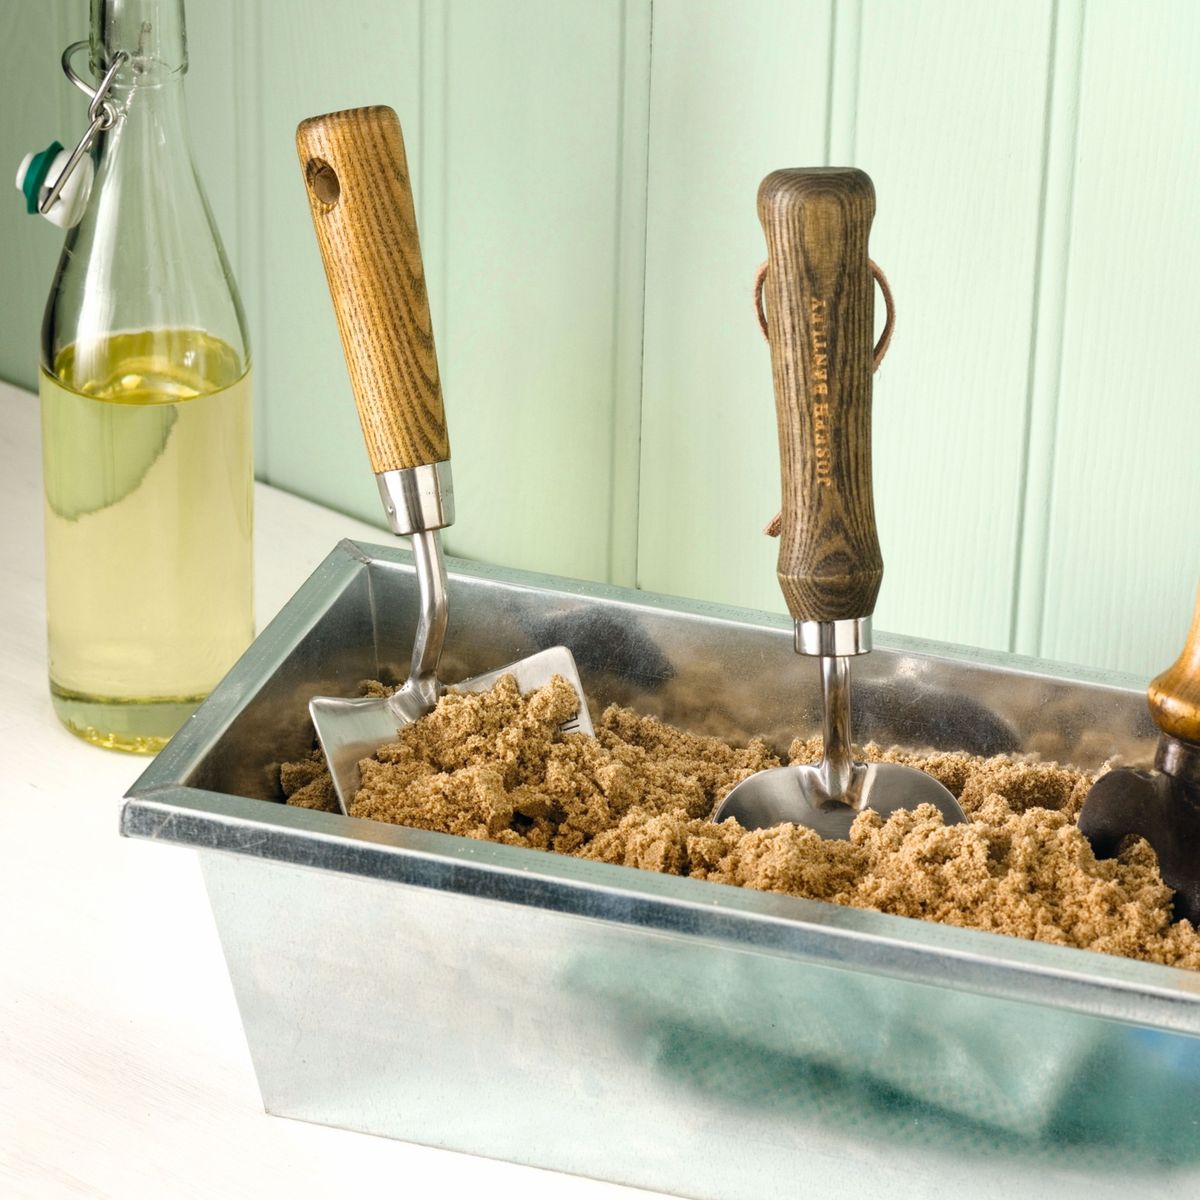 Why you should bury garden tools in sand